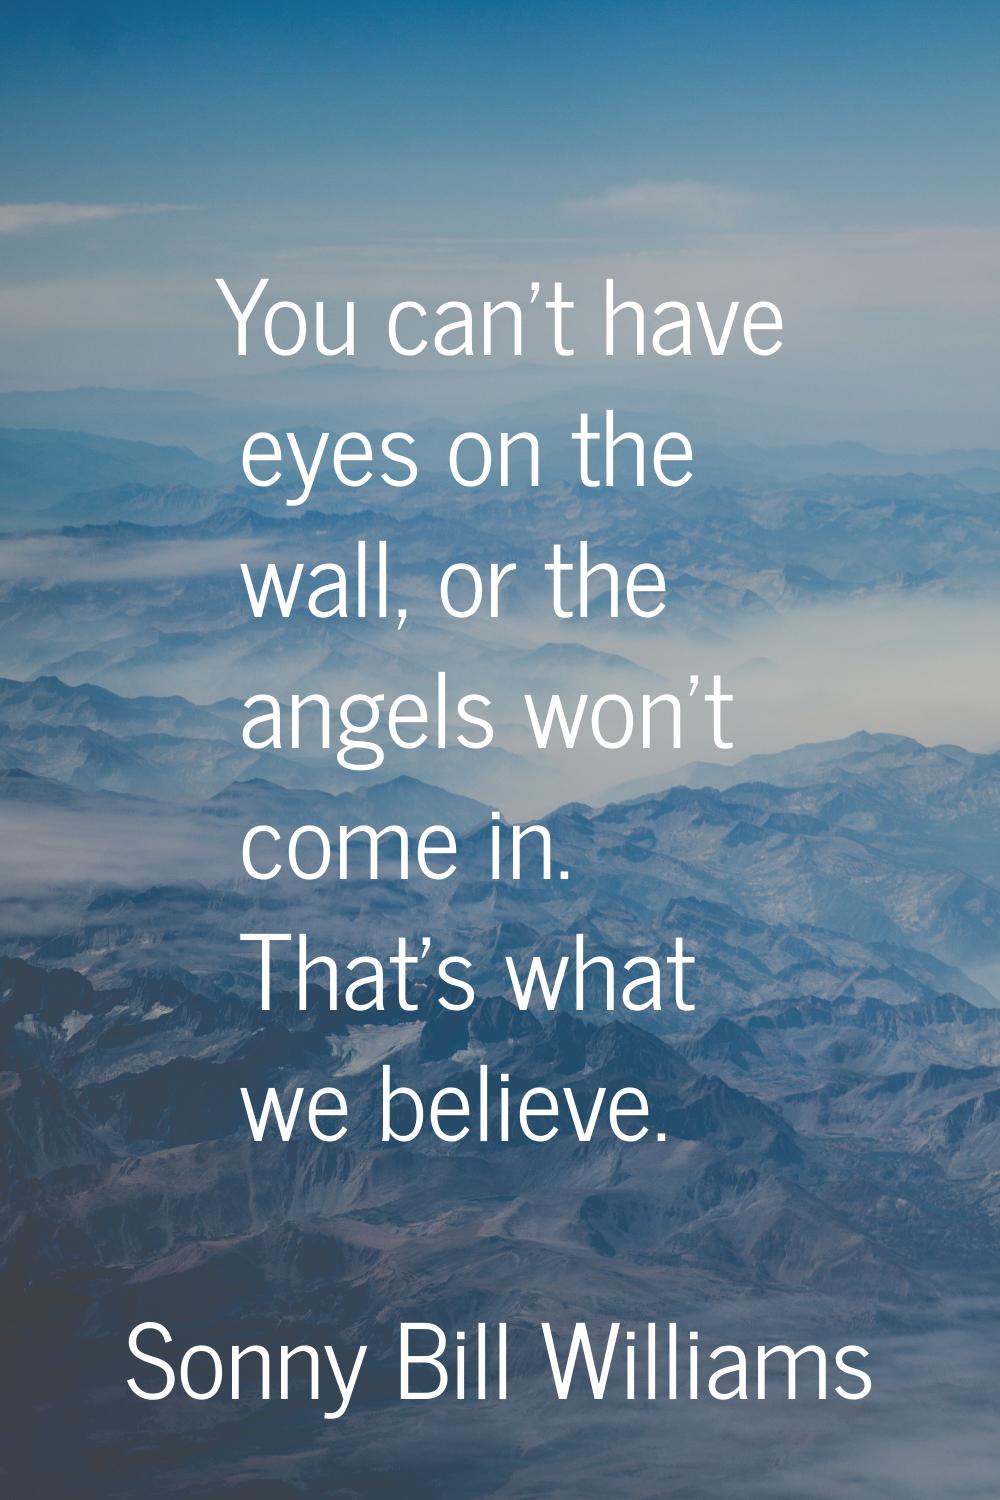 You can't have eyes on the wall, or the angels won't come in. That's what we believe.